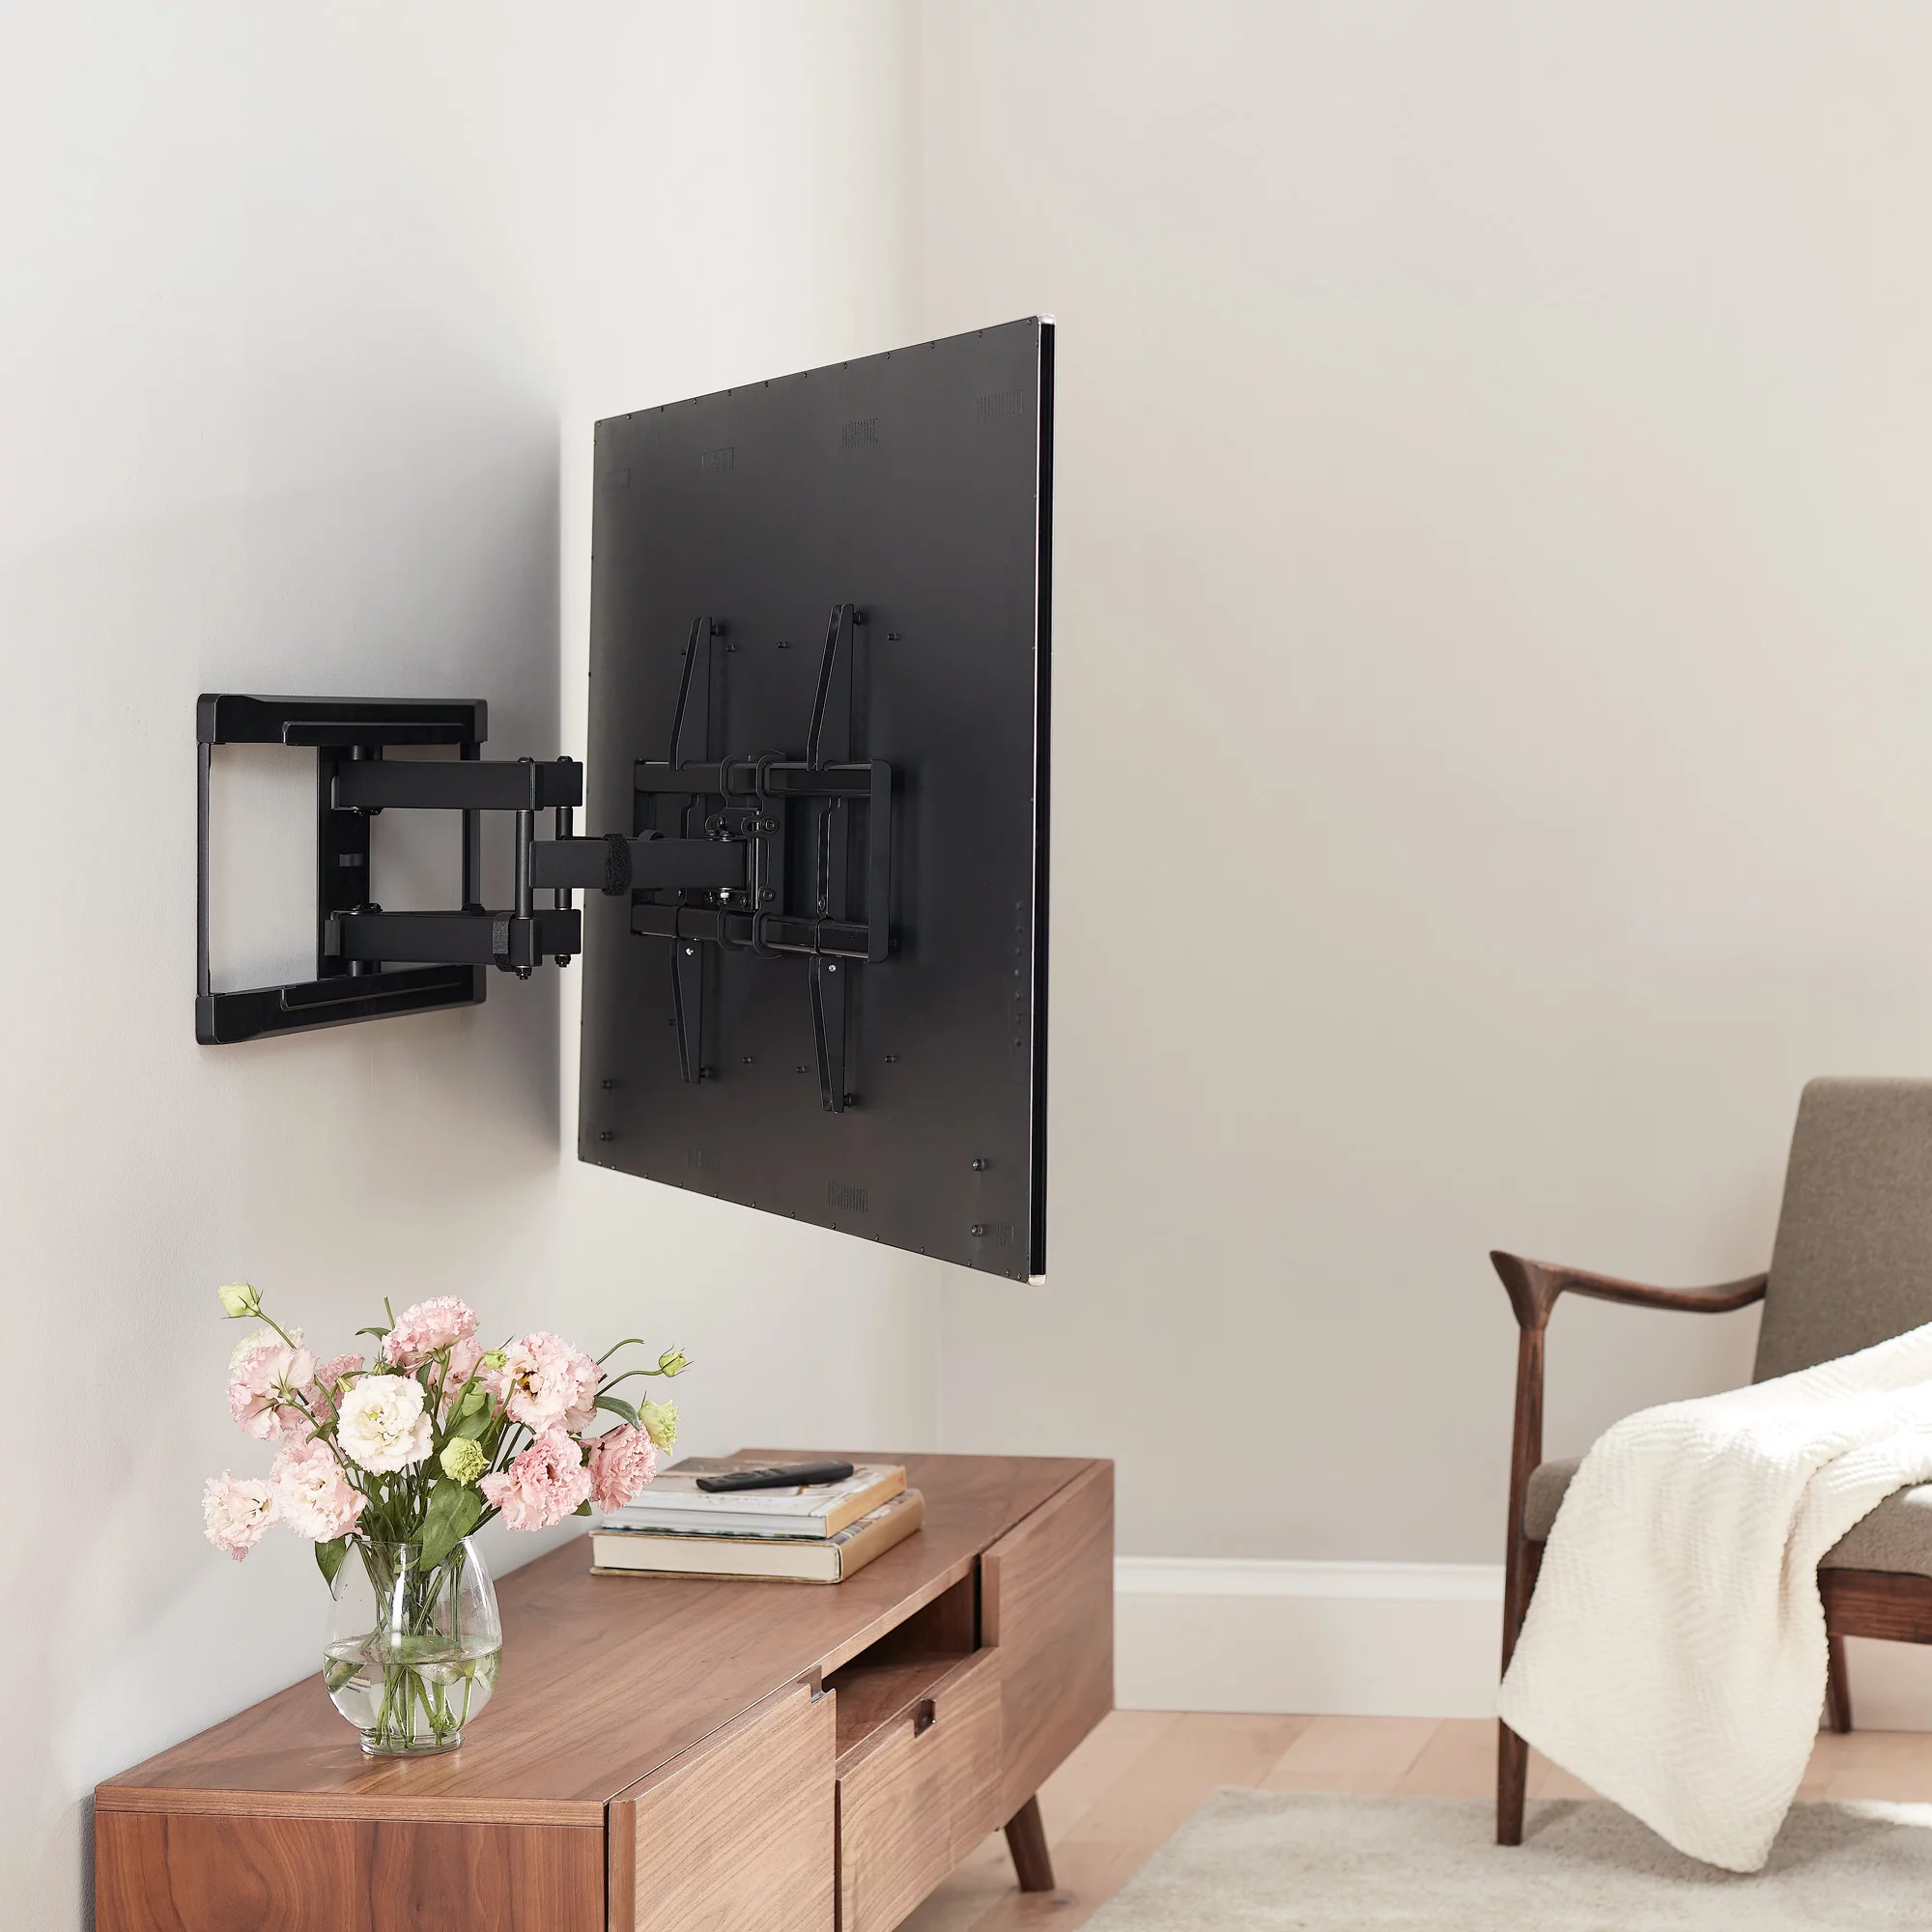 onn. Full Motion TV Wall Mount for 50" to 86" TVs, up to 15 Tilting